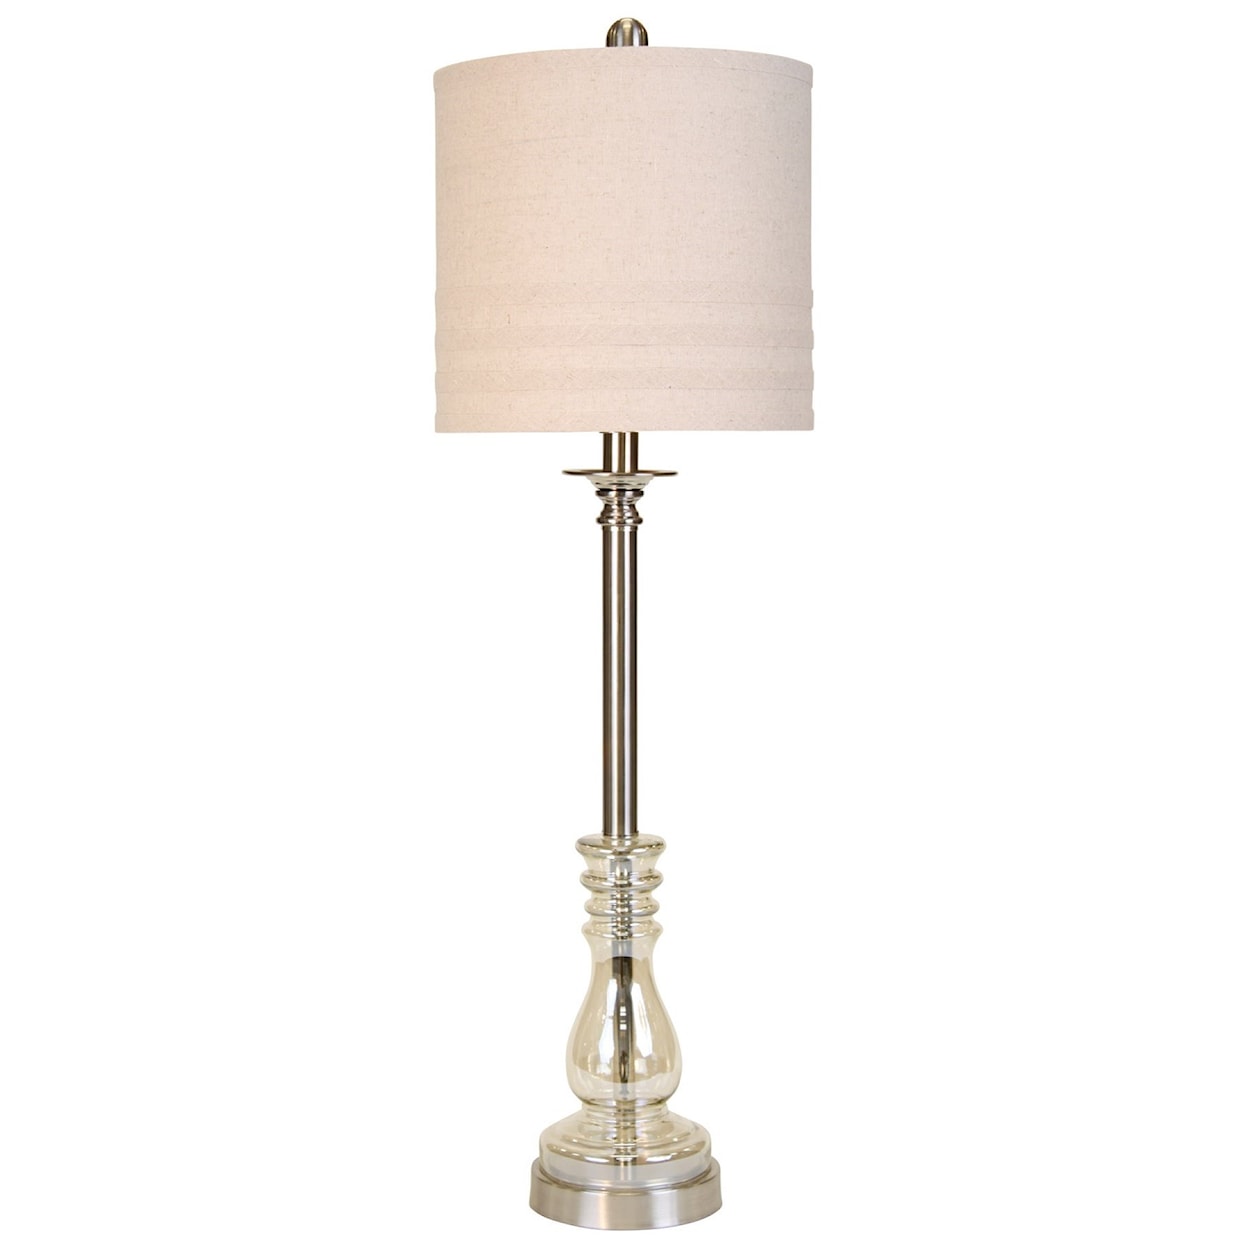 StyleCraft Lamps A Classic Look - This Buffet Lamp